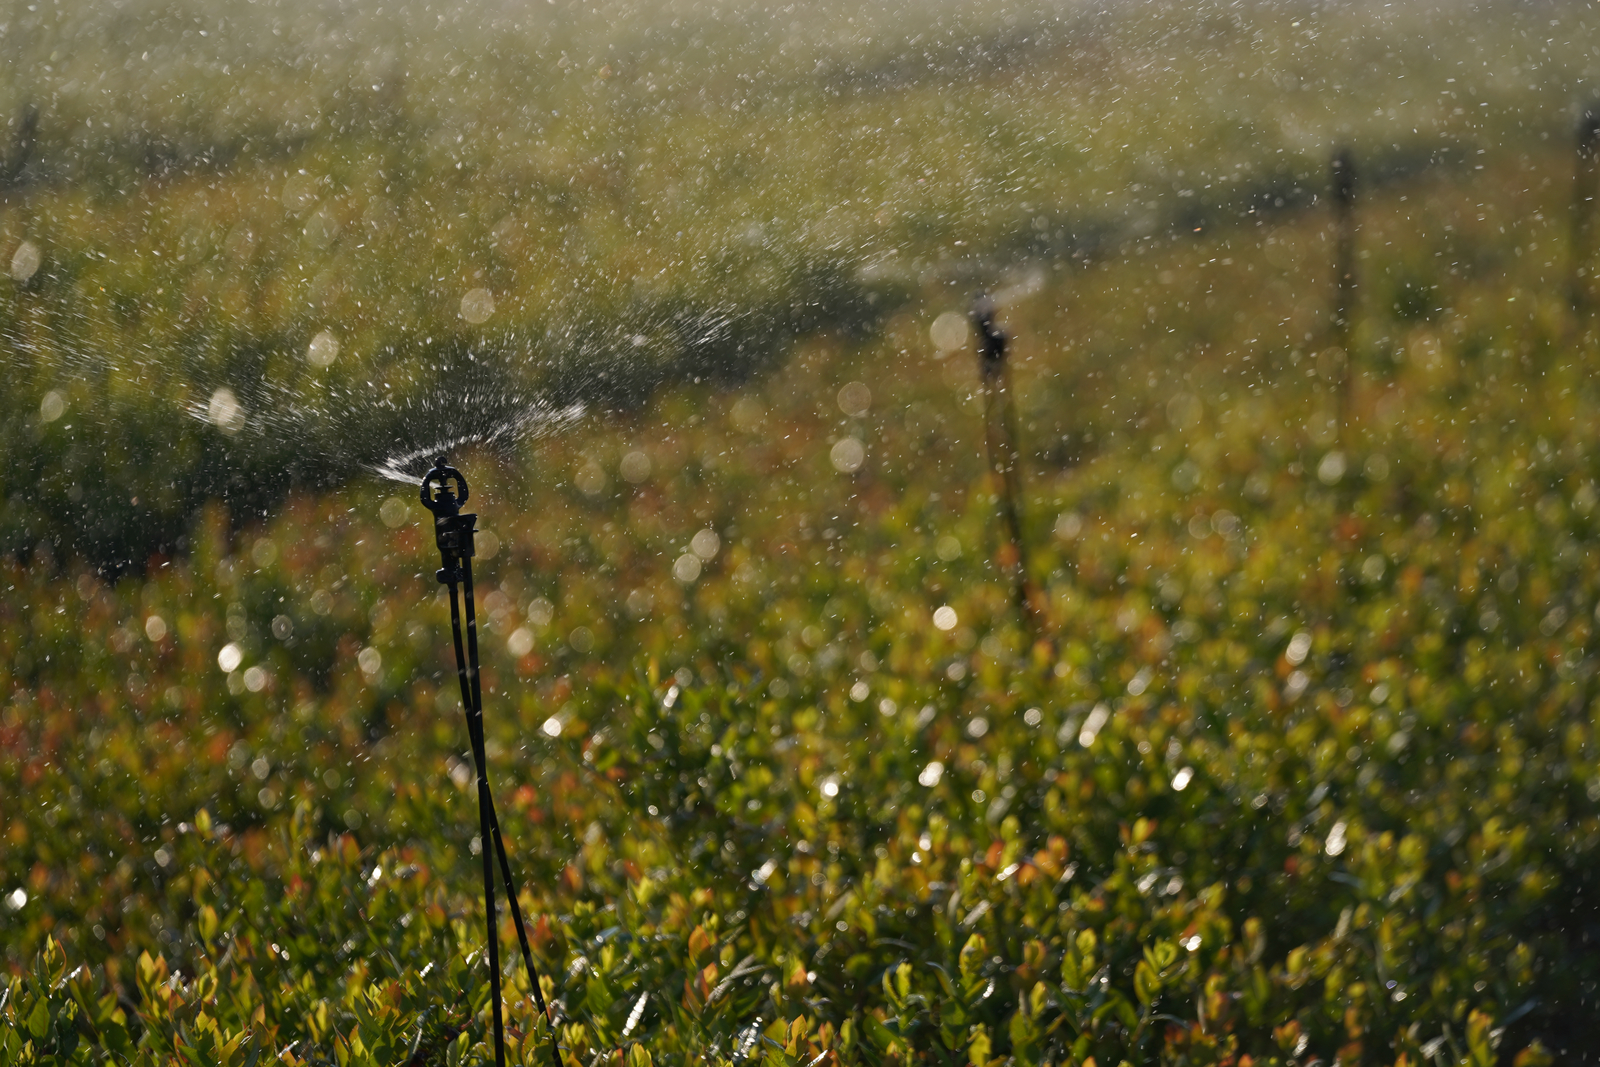 SPRINKLERS IRRIGATION – MUCH MORE THAN JUST IRRIGATION